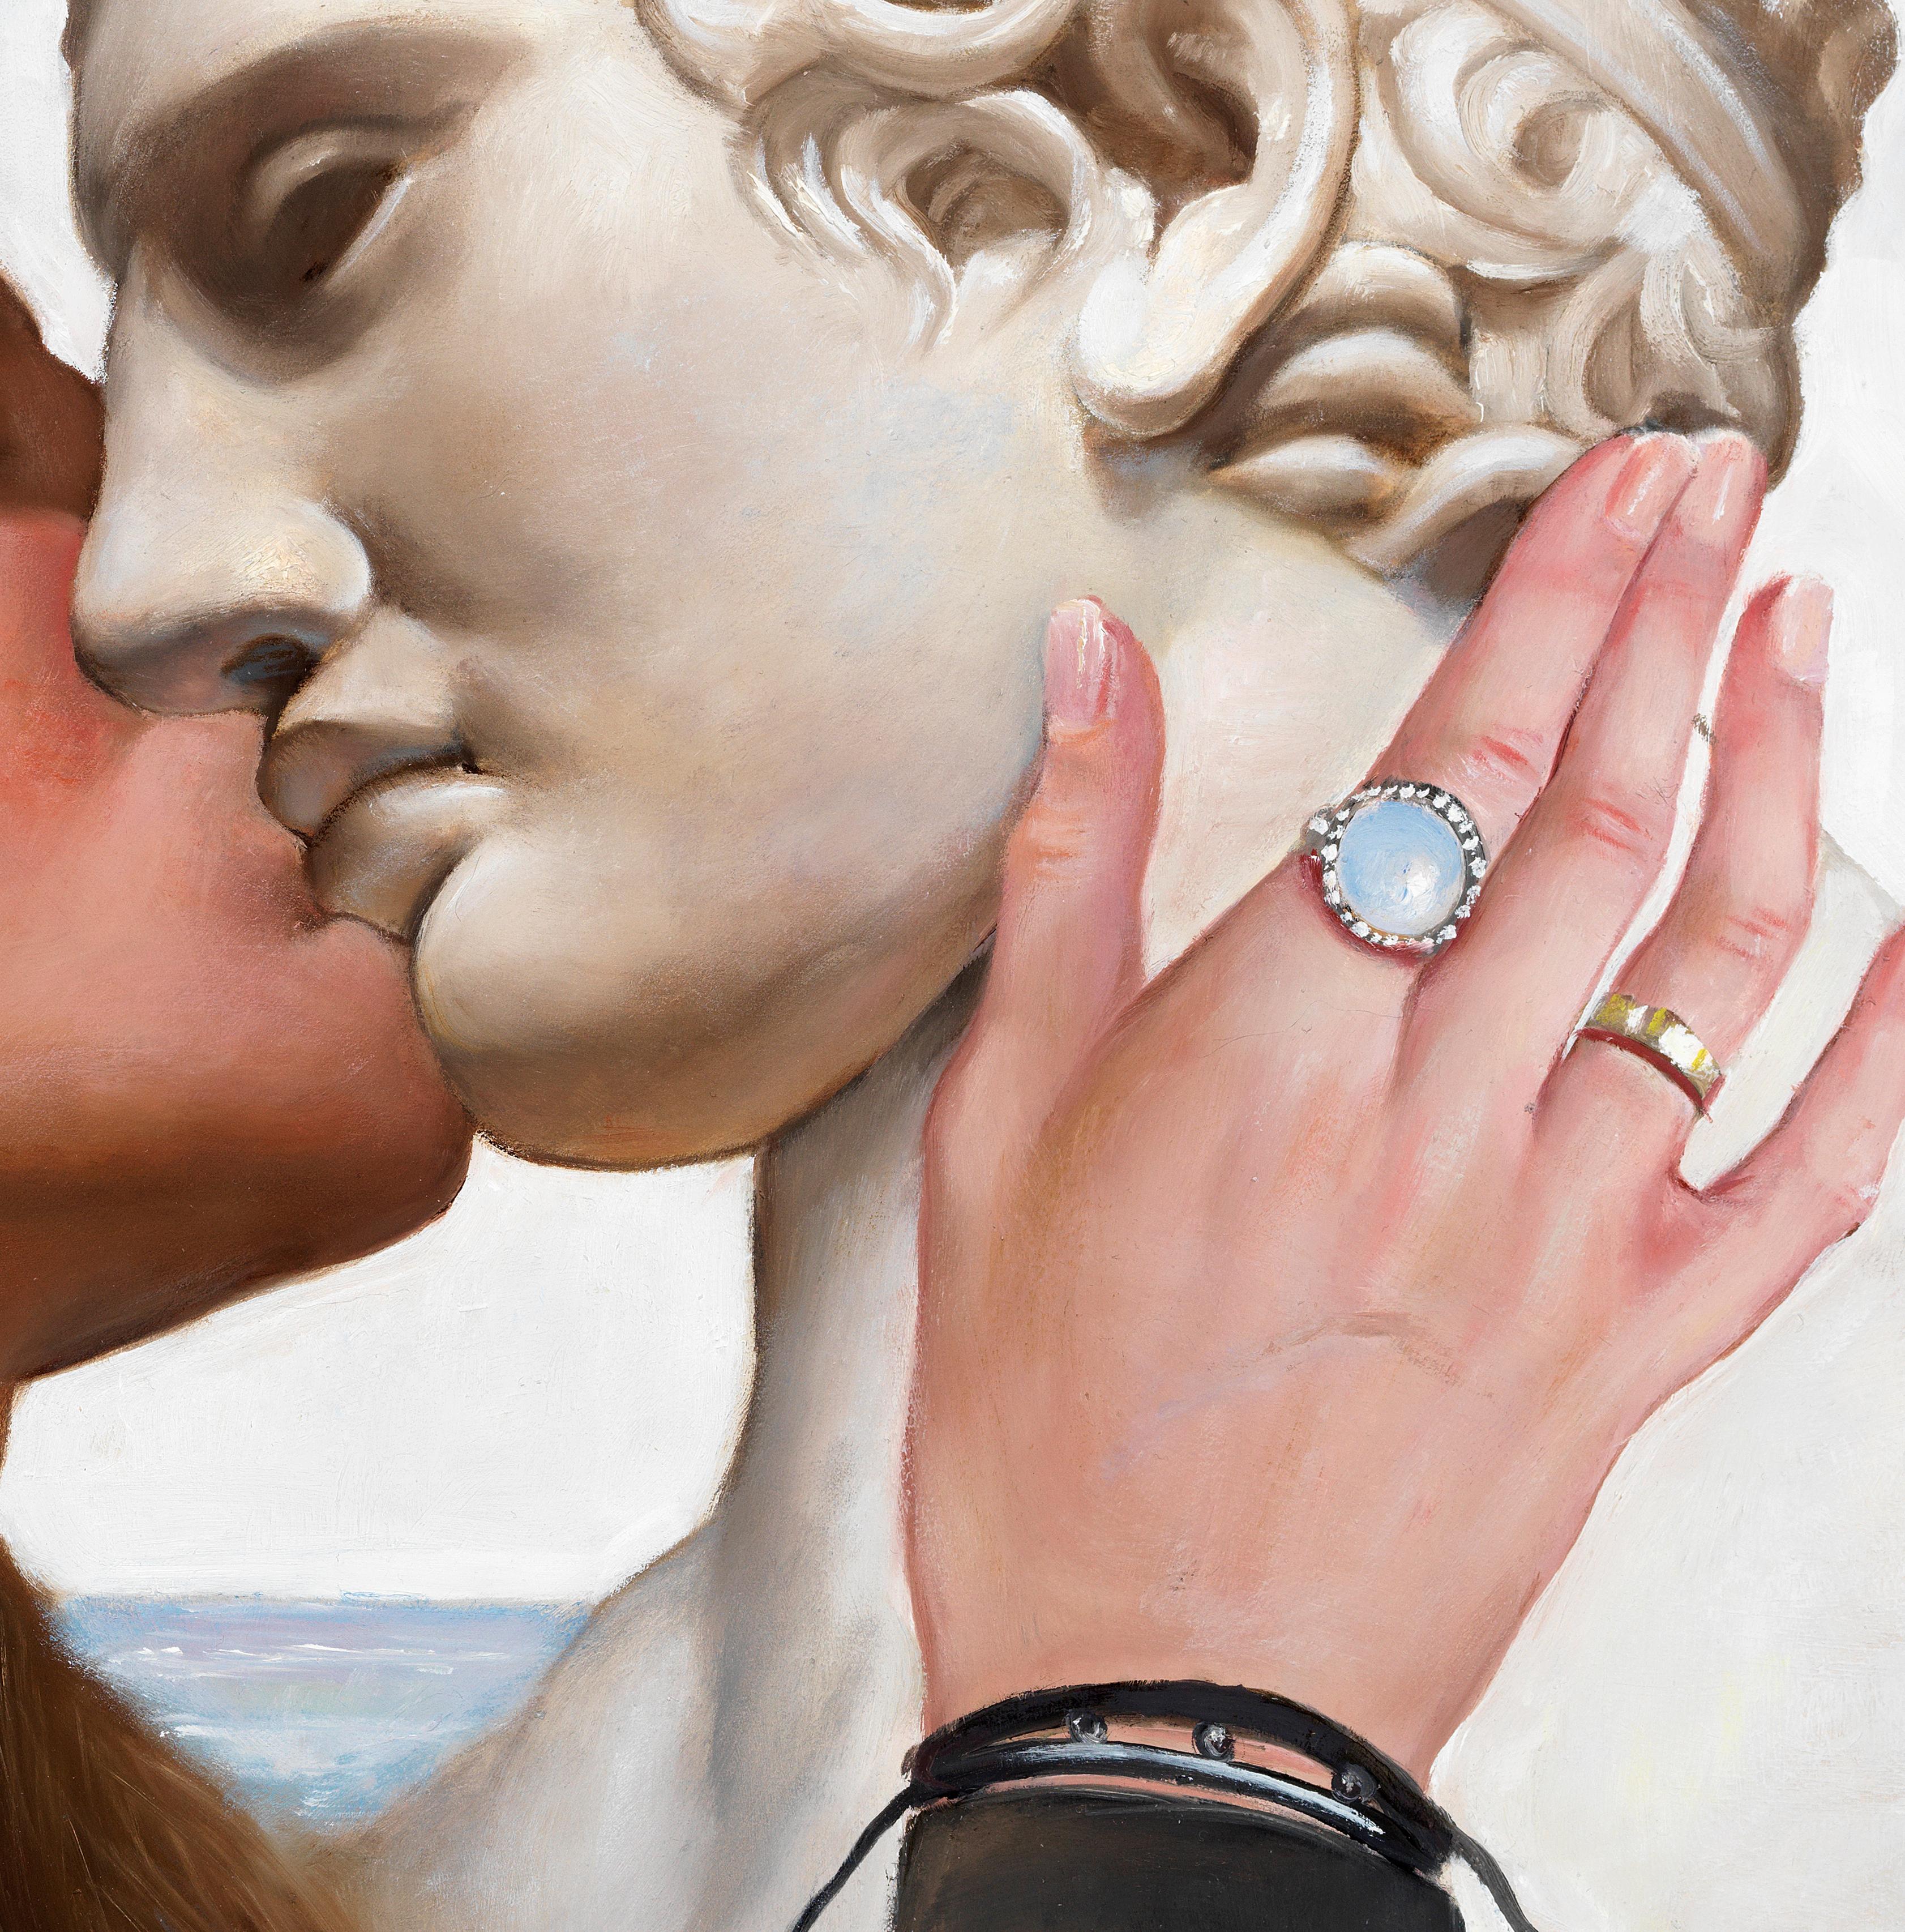 Beauty's Kiss - Woman Kissing a Statue of a Greek Warrior, Original Oil Painting For Sale 1